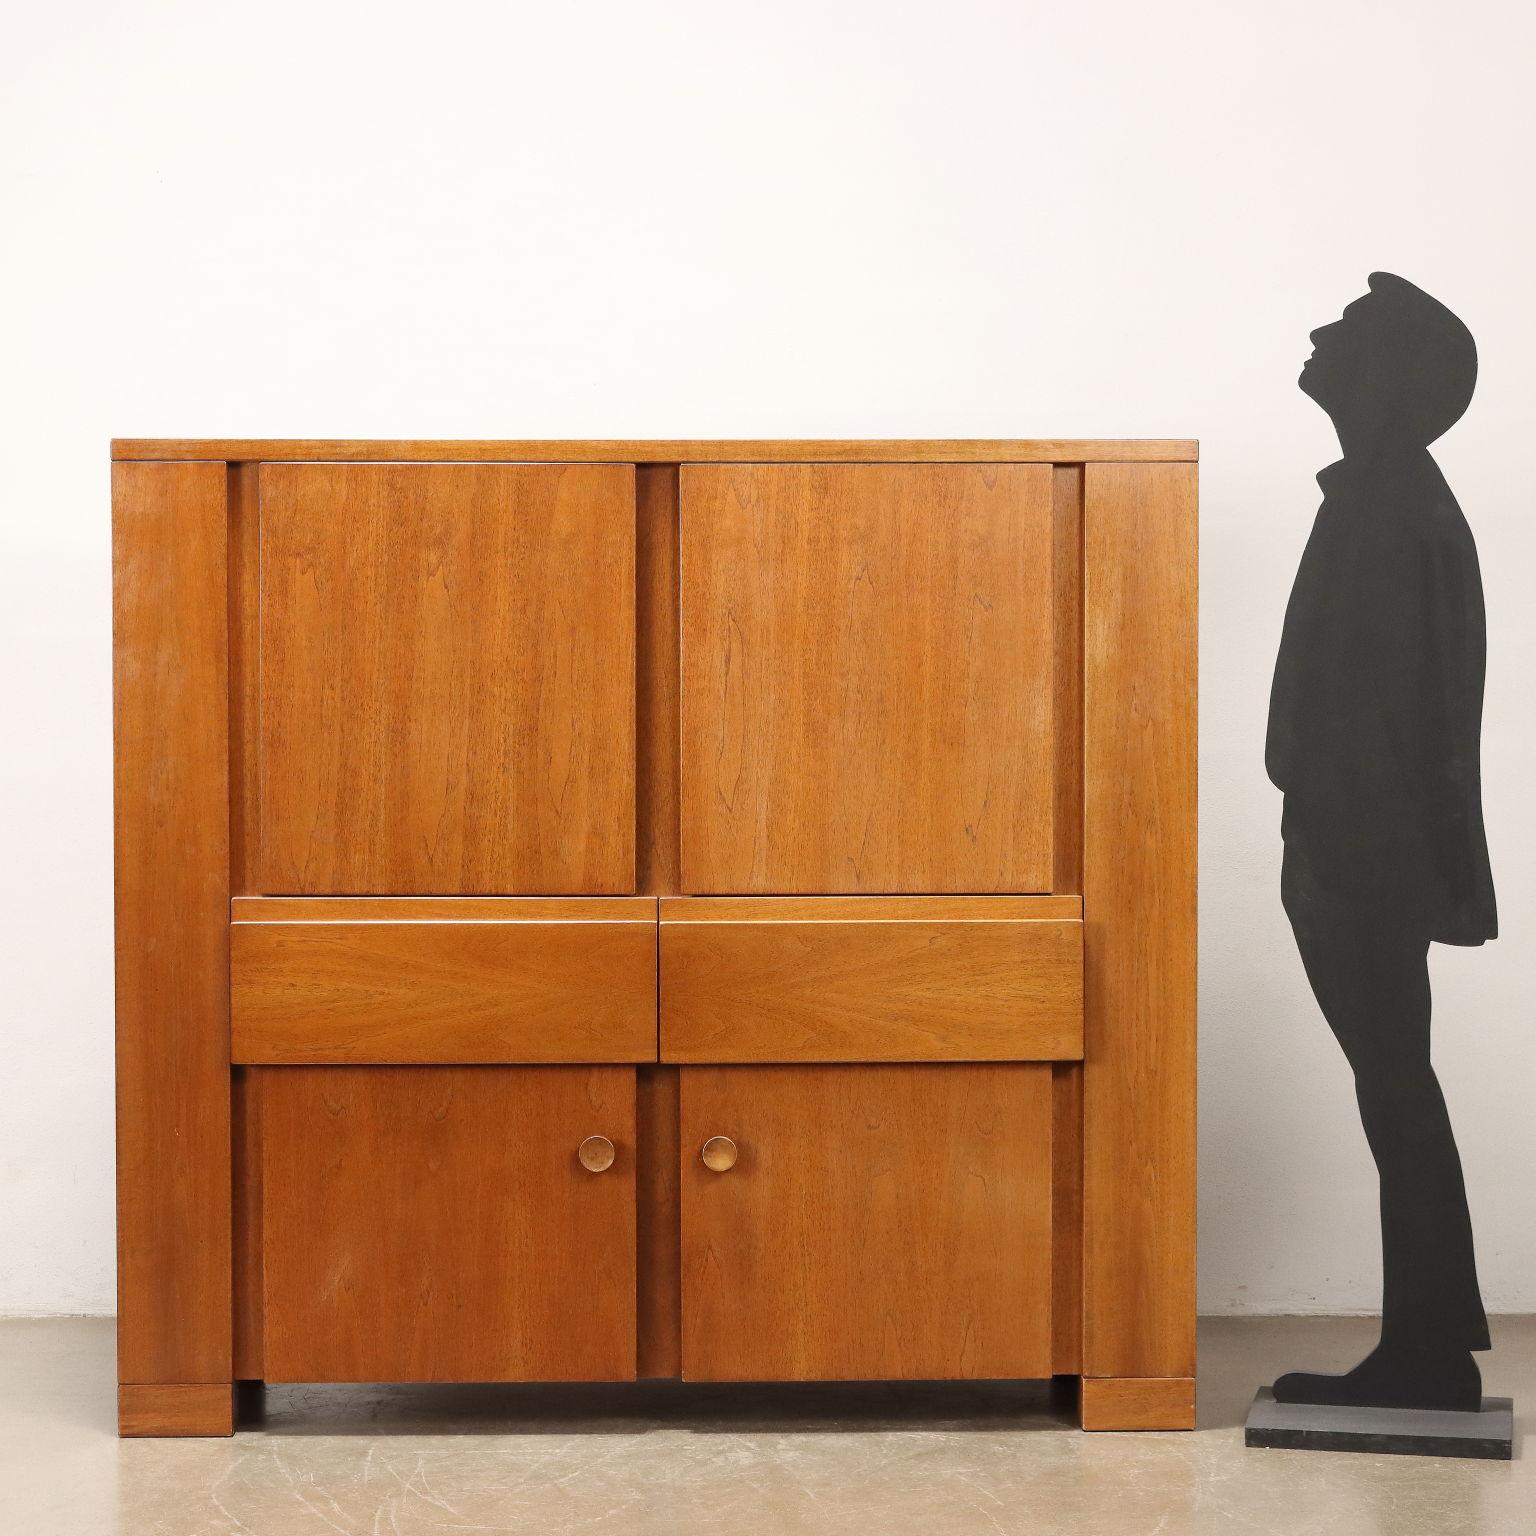 Sideboard cabinet with hinged doors and exposed drawers, designed by Michelucci in 1964; walnut veneer wood. Good Condition